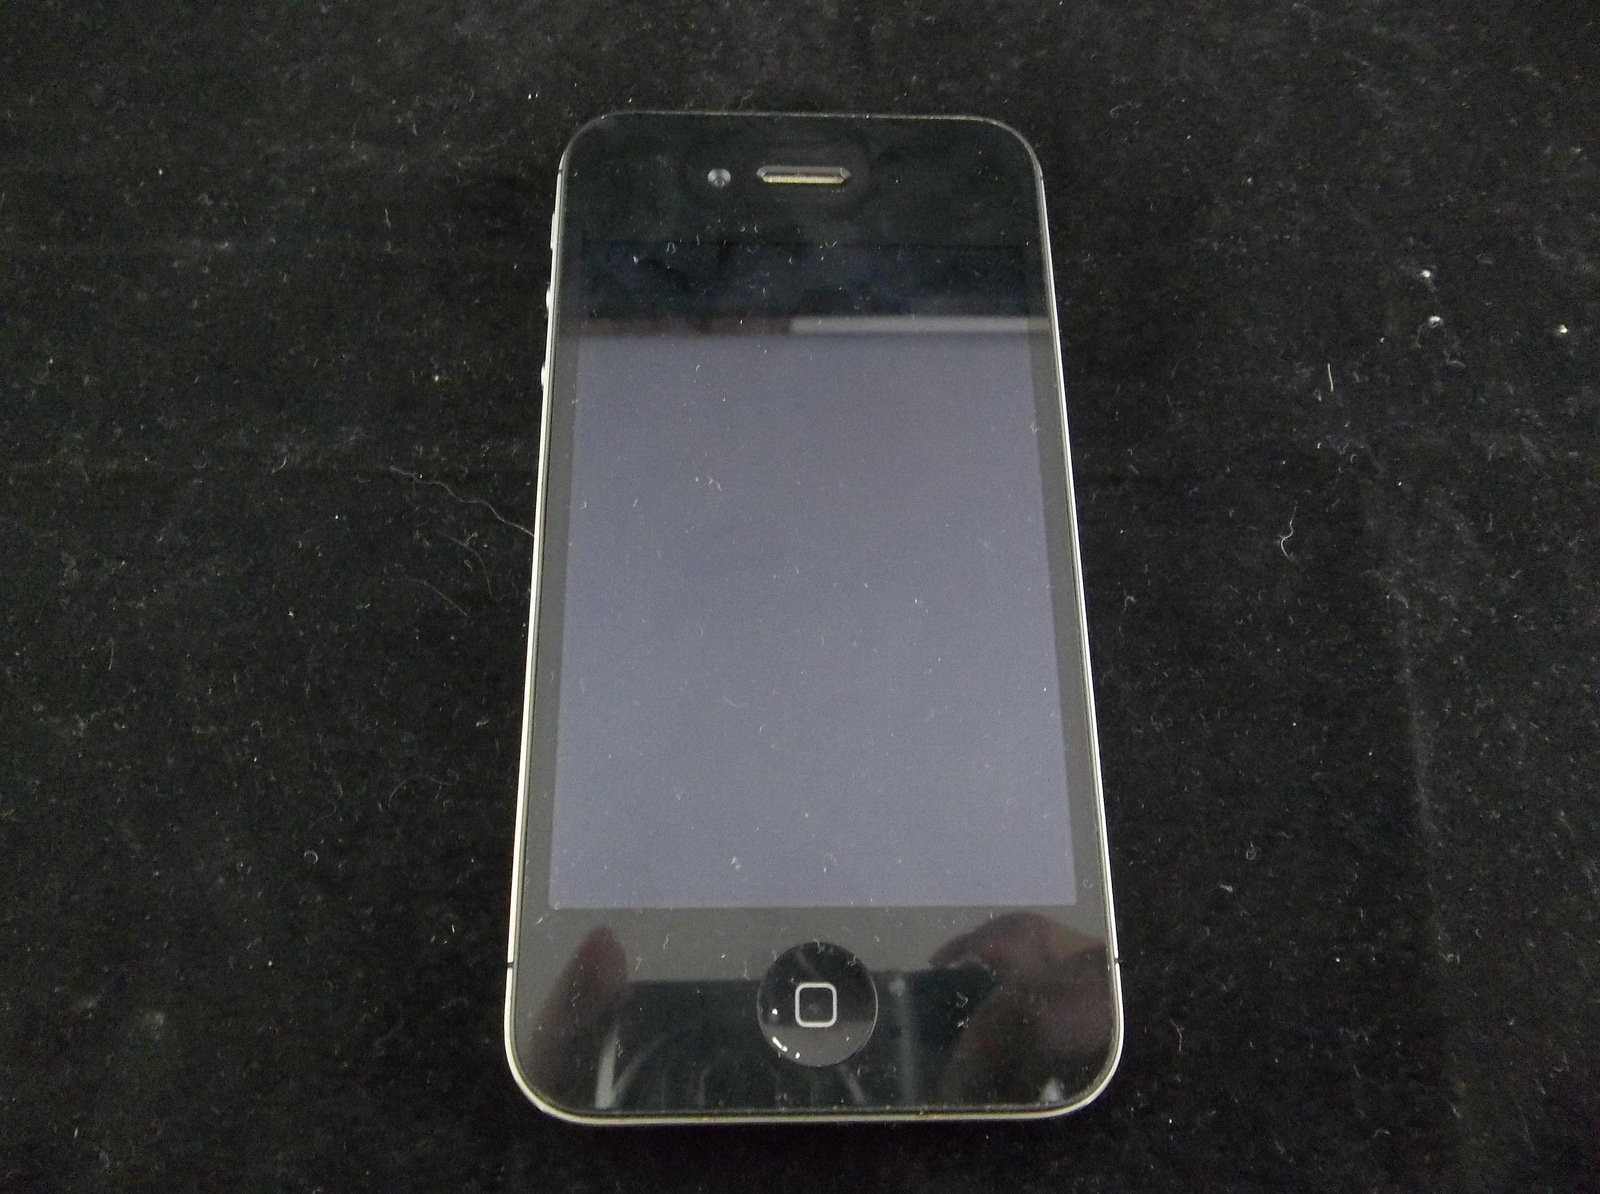 Apple iPhone 4 A1349 Black Smartphone For Parts Or Repair - $20.00